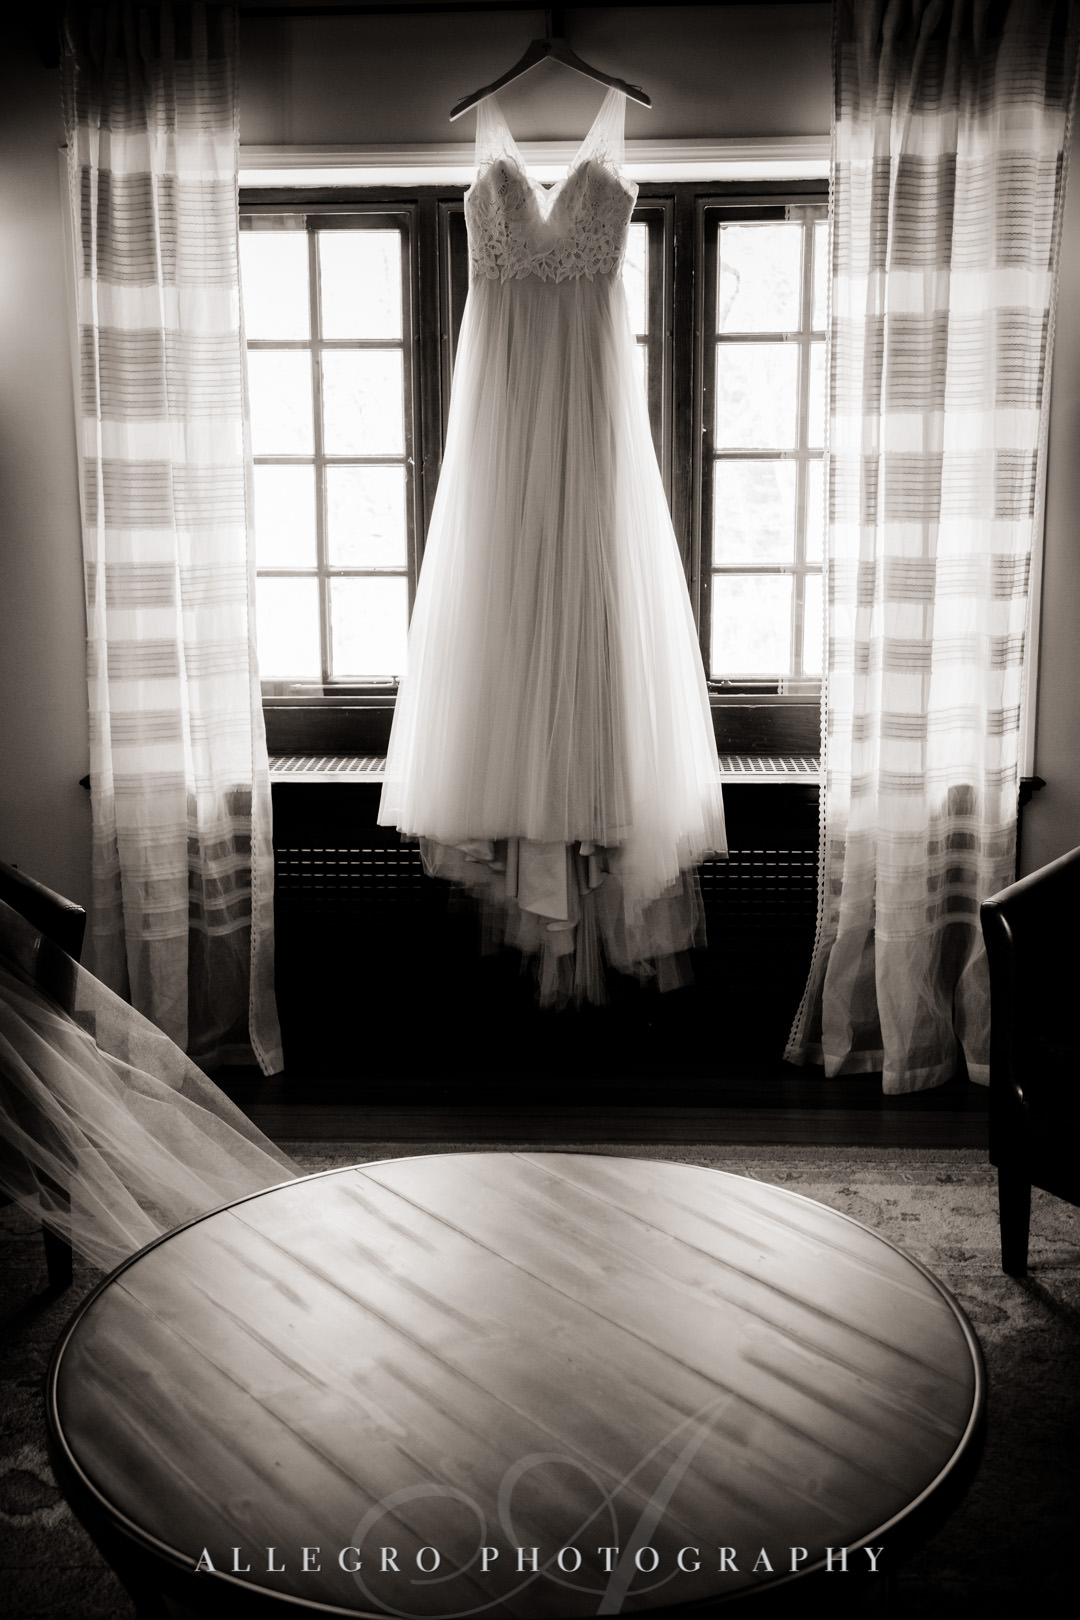 Black and white photo of wedding dress hanging in sunlit room.